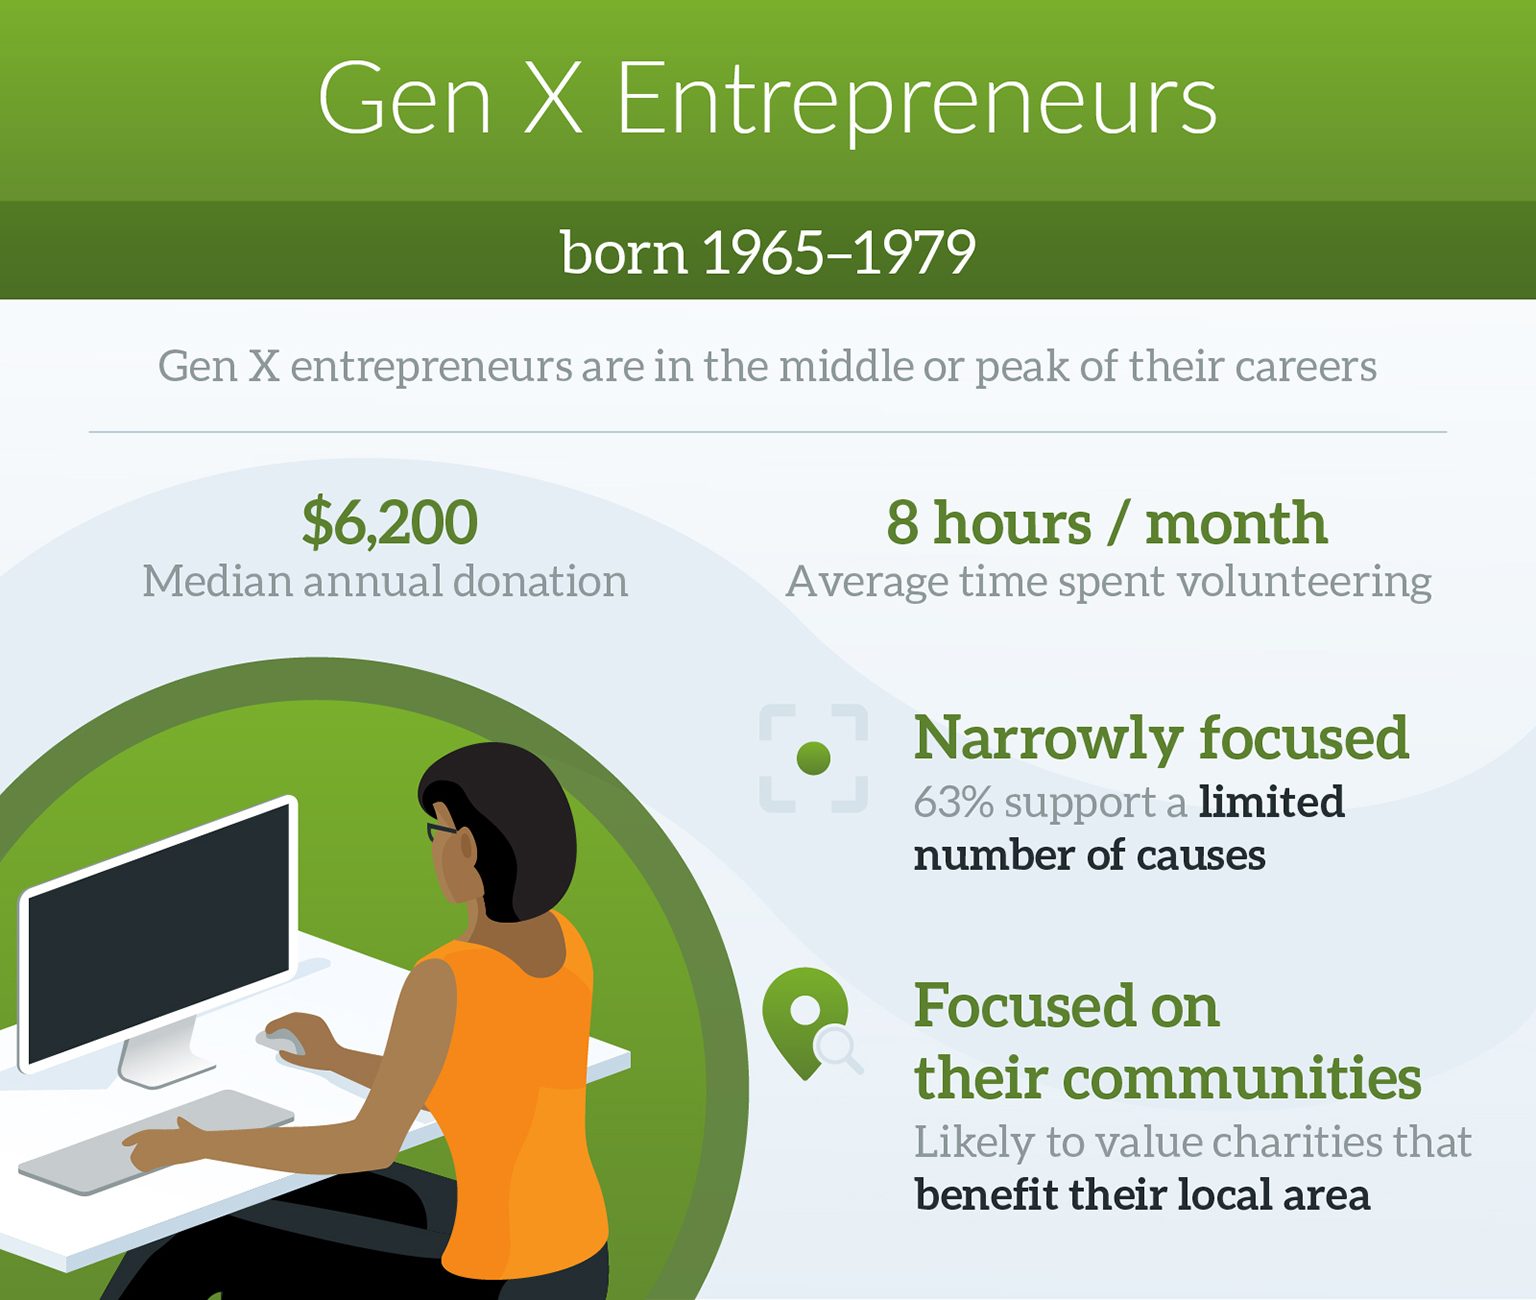 Graphic describing Gen X entrepreneurs and how they approach philanthropy. They support a limited set of causes and value charities that benefit their local area.